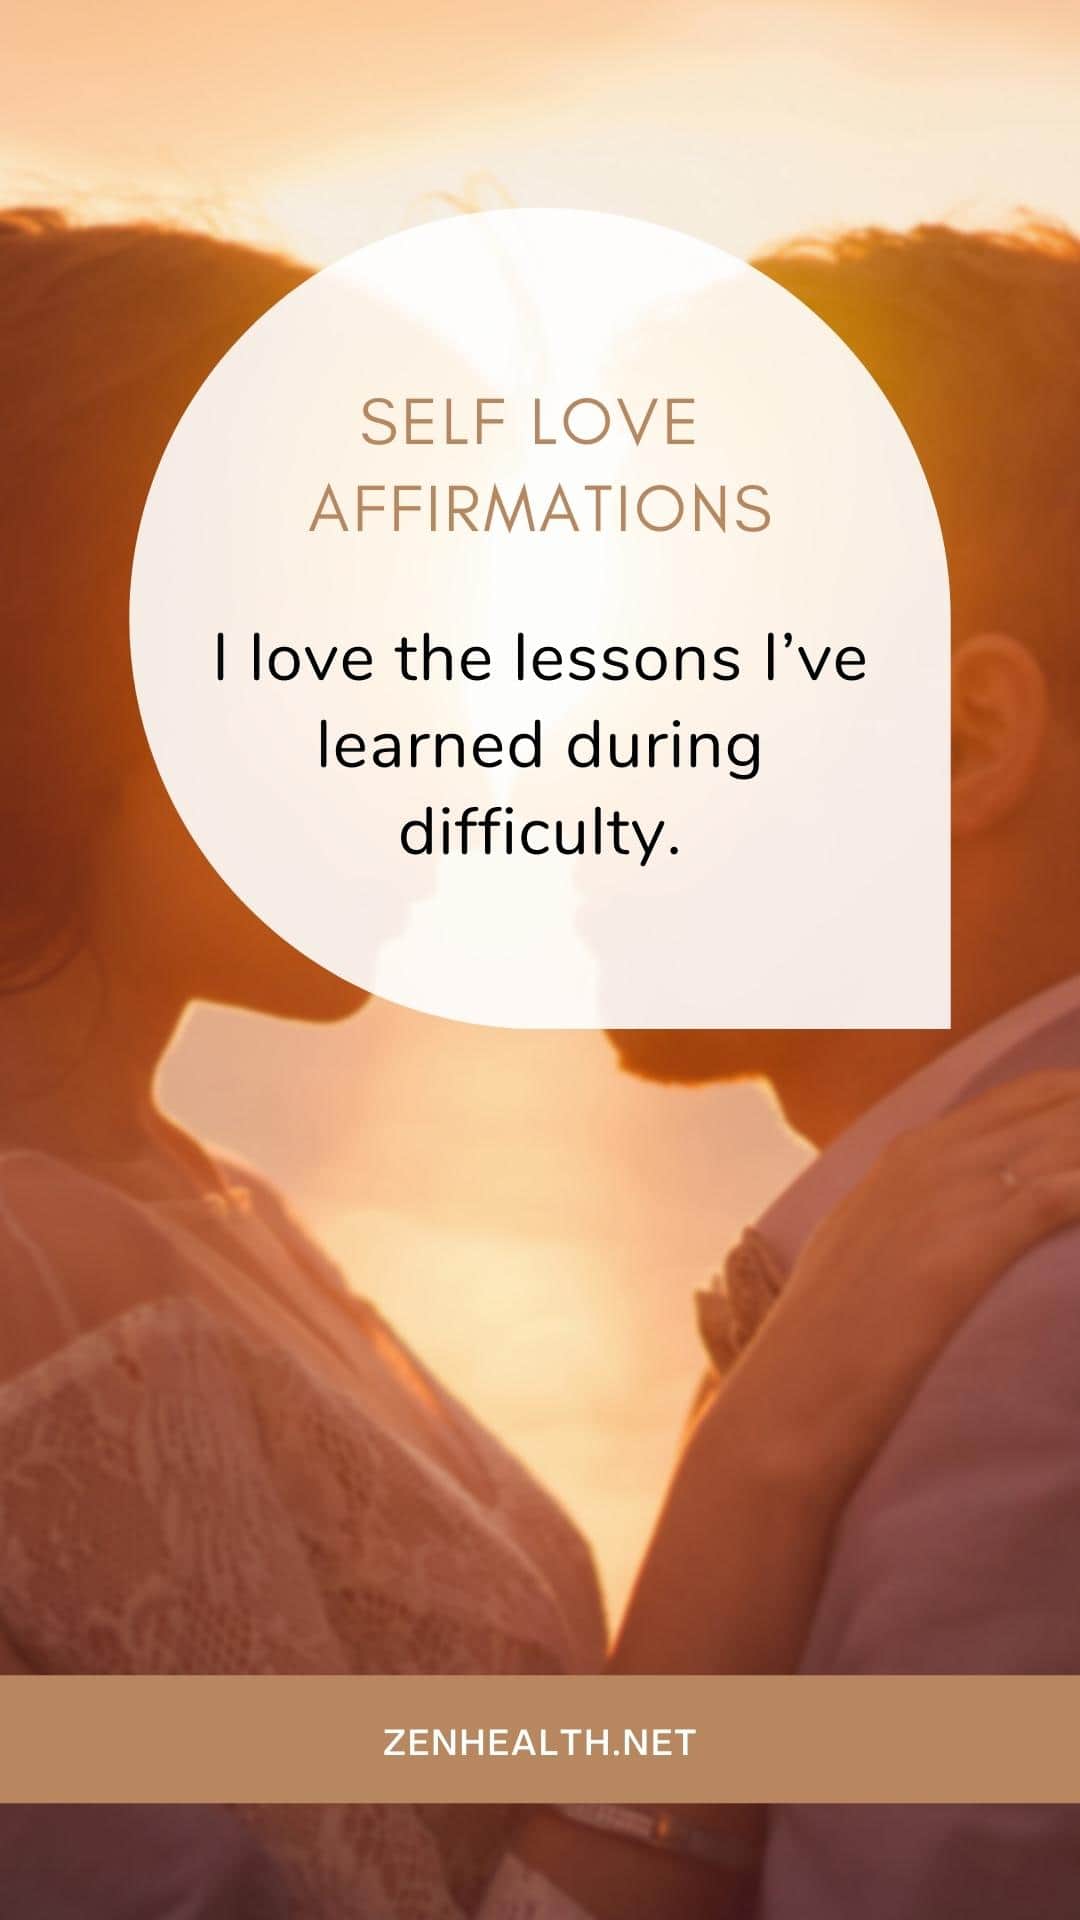 Self love affirmations: I love the lessons I've learned during difficulty